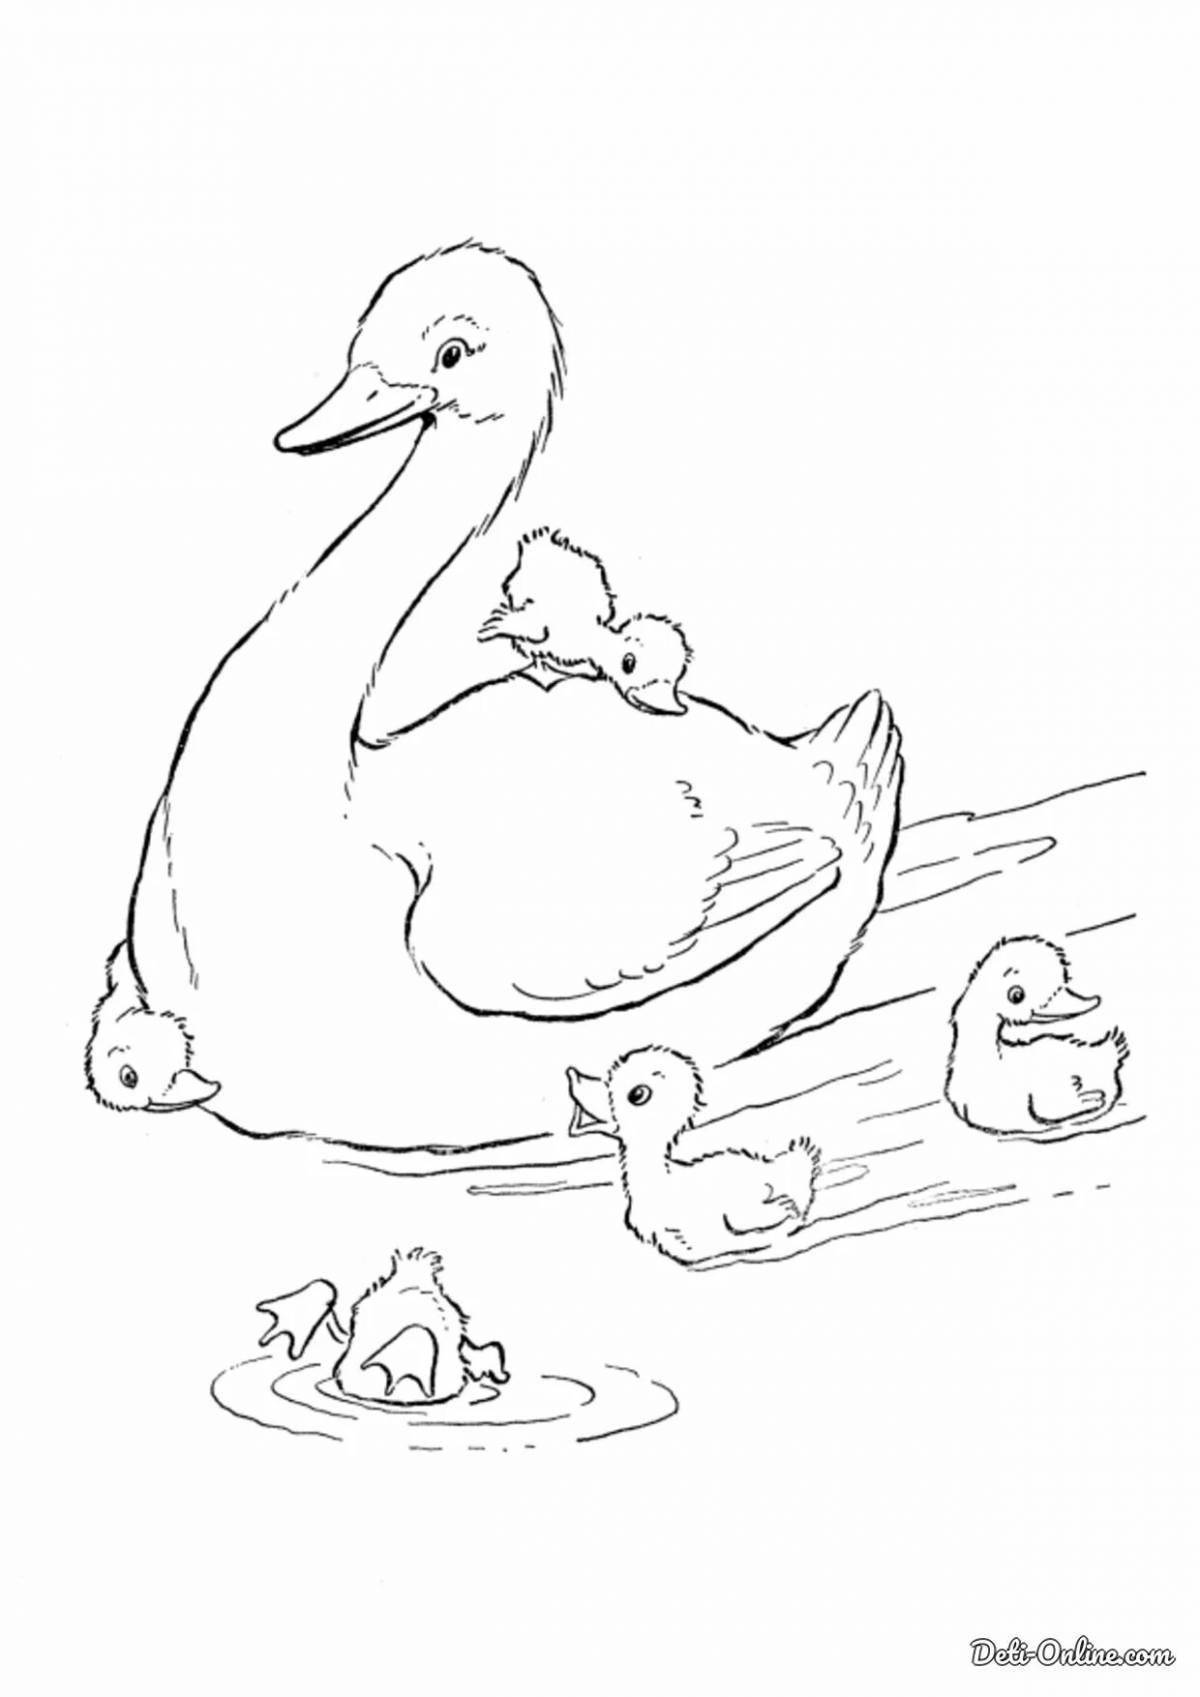 Sparkling duck and duckling coloring page